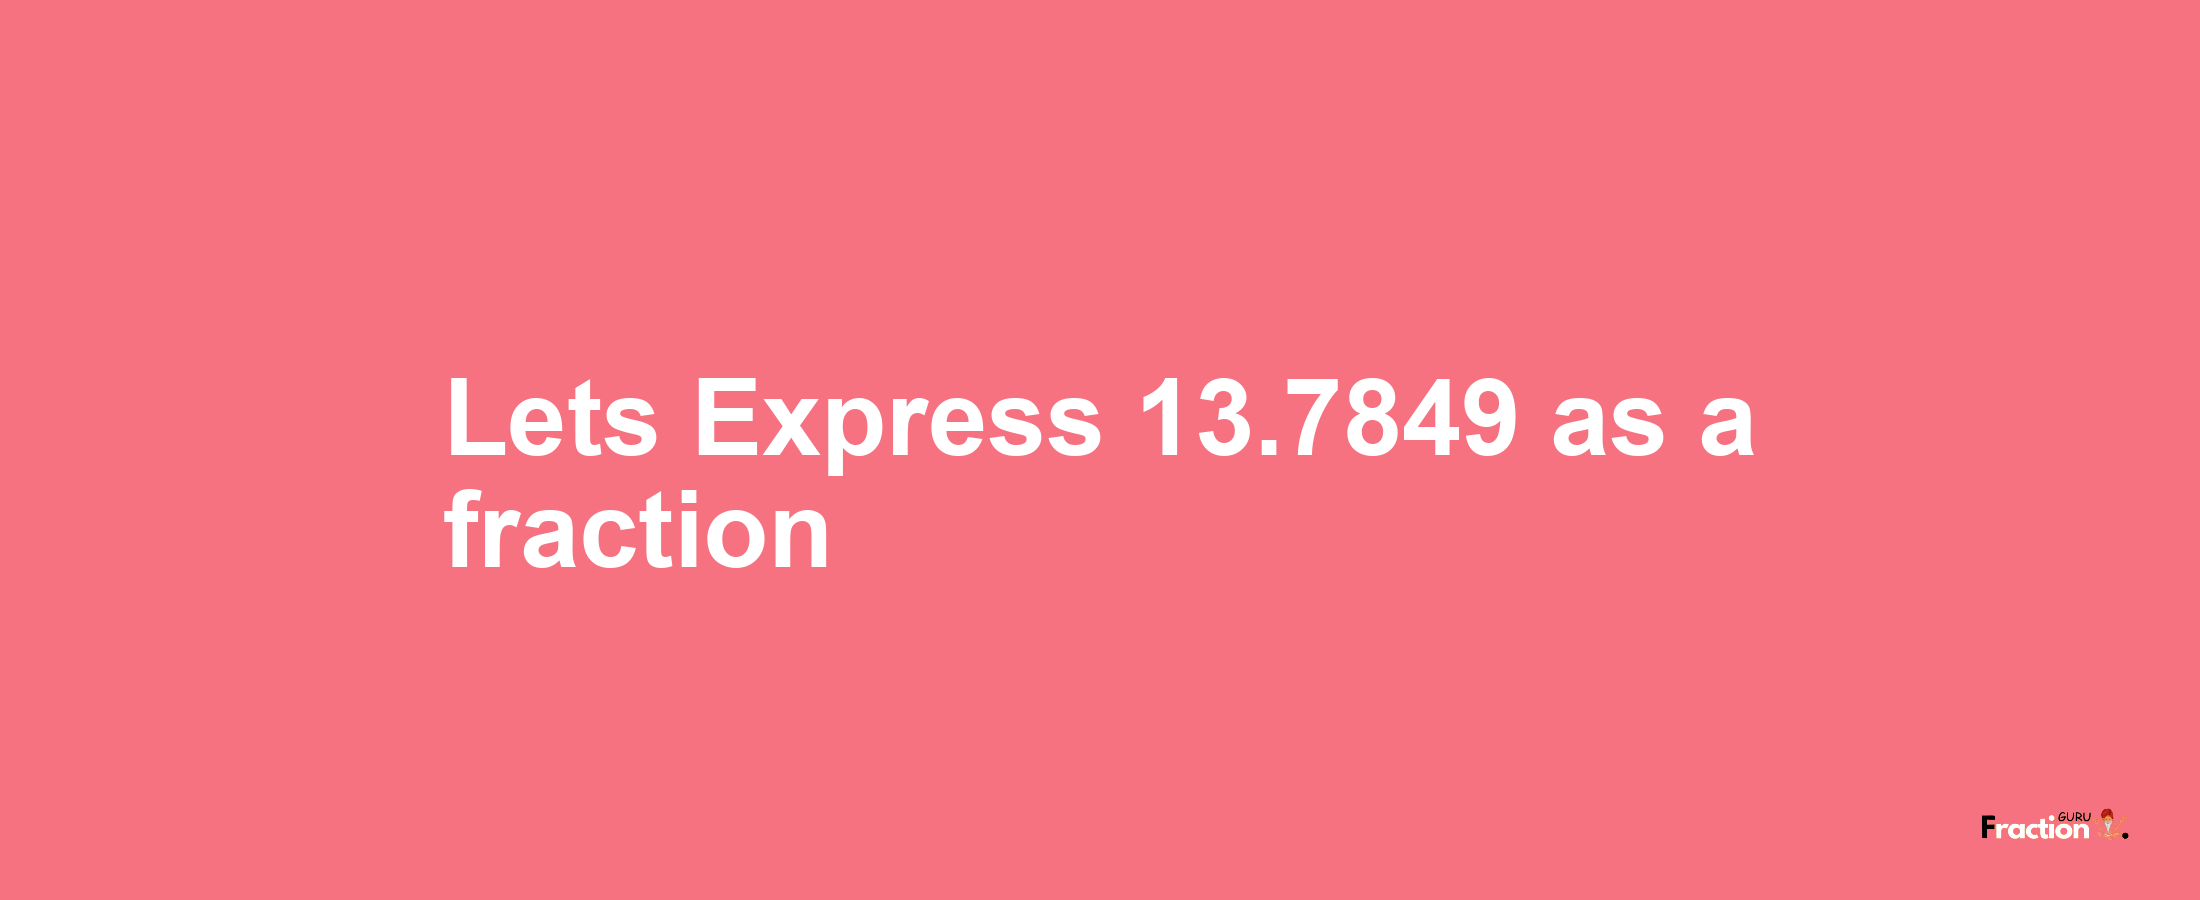 Lets Express 13.7849 as afraction